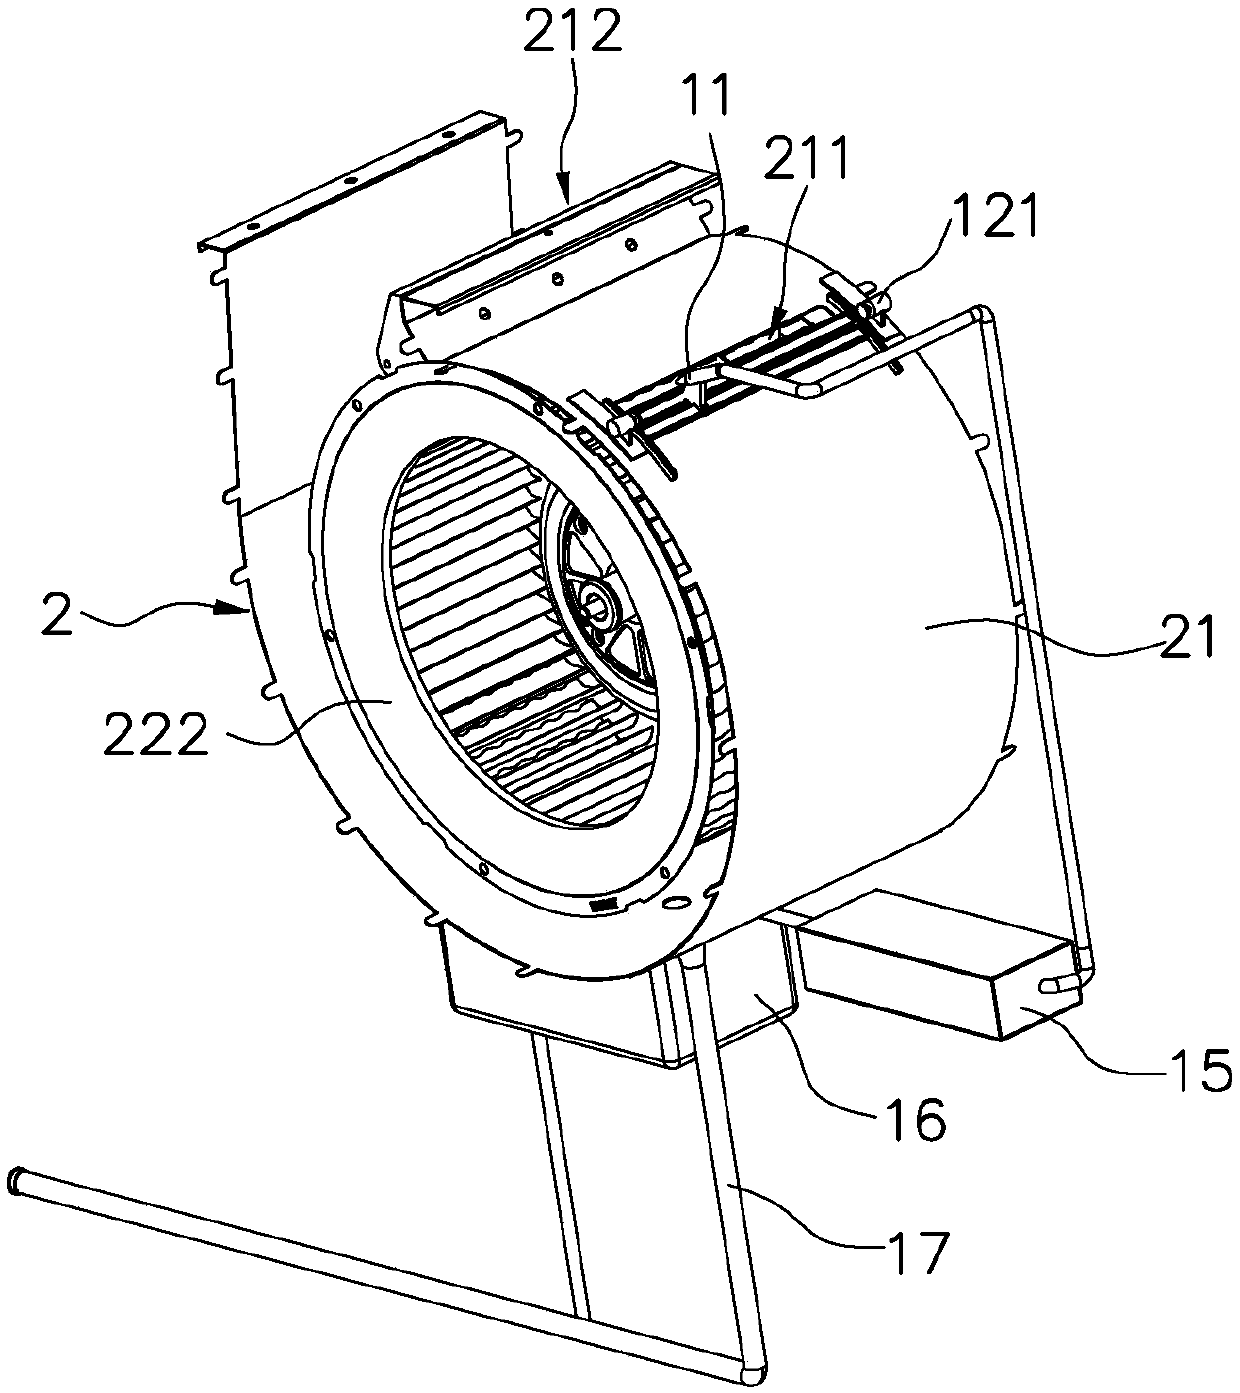 Cleaning device for extractor hood fan system